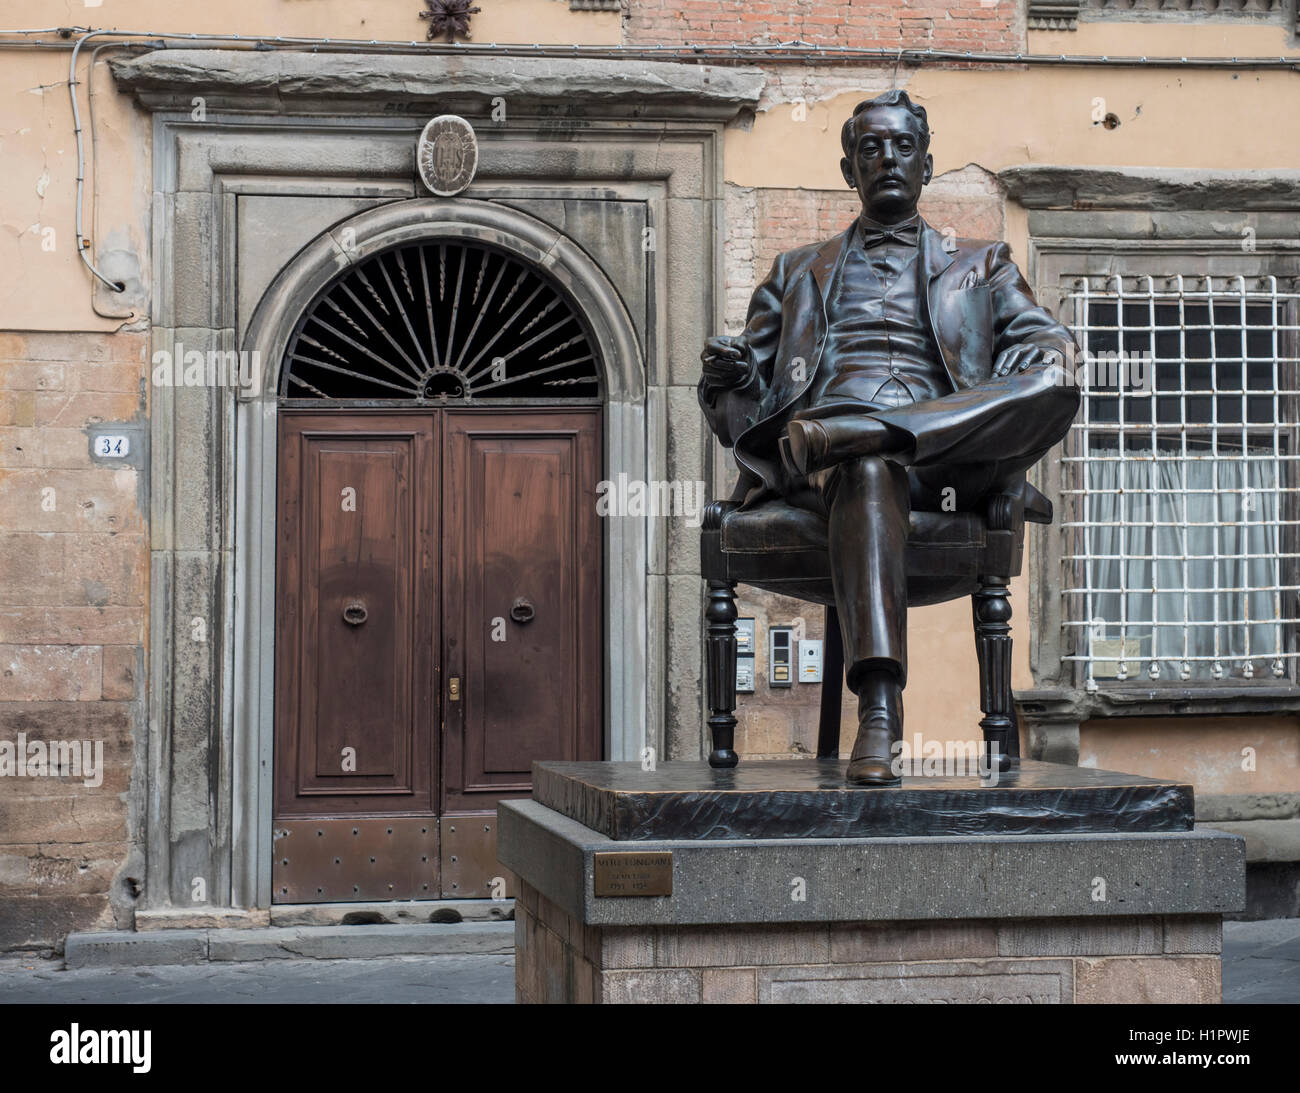 Bronze statue of composer Giacomo Puccini in his birthplace, Lucca, Tuscany, Italy Stock Photo